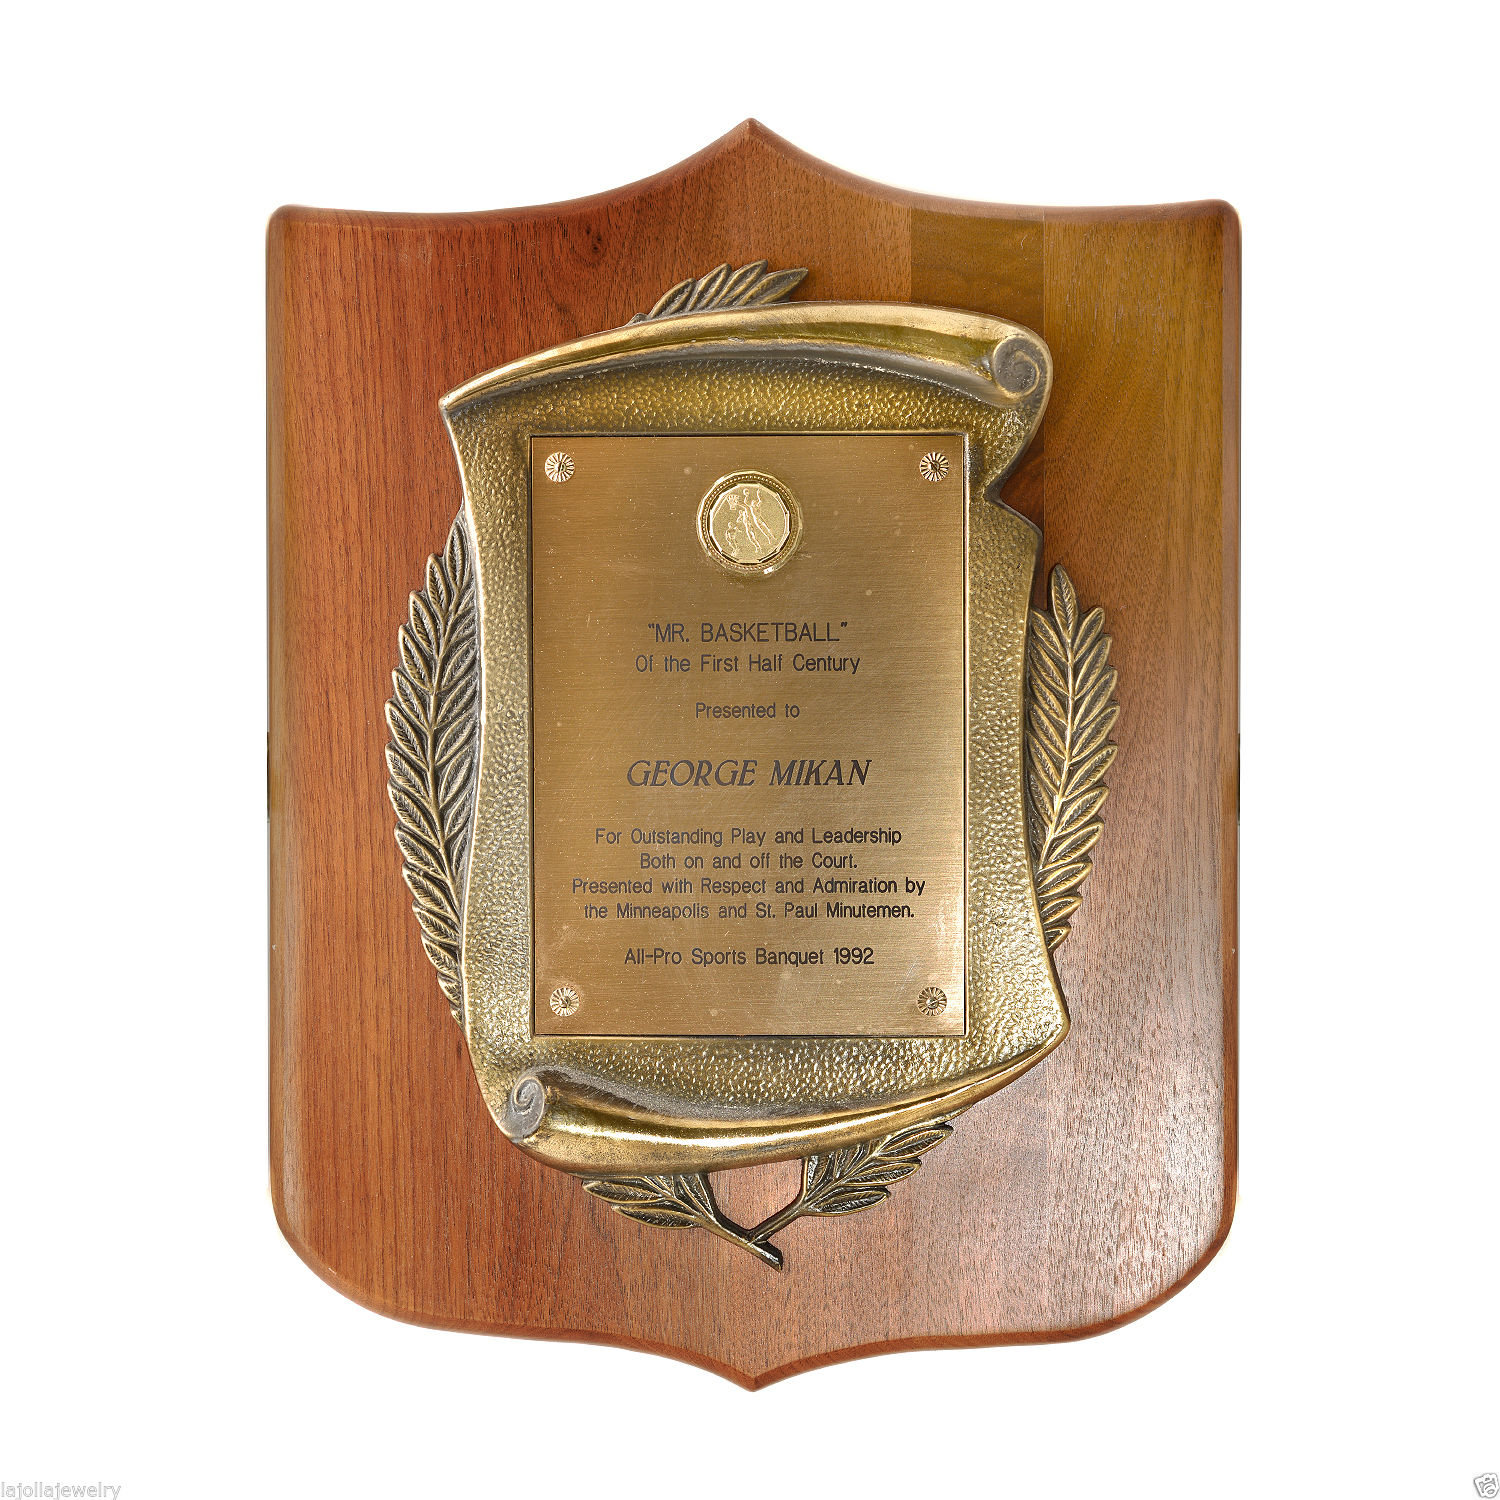 1992 Mr Basketball Of The First Half Century George Mikan Award Plaque Collectionzz